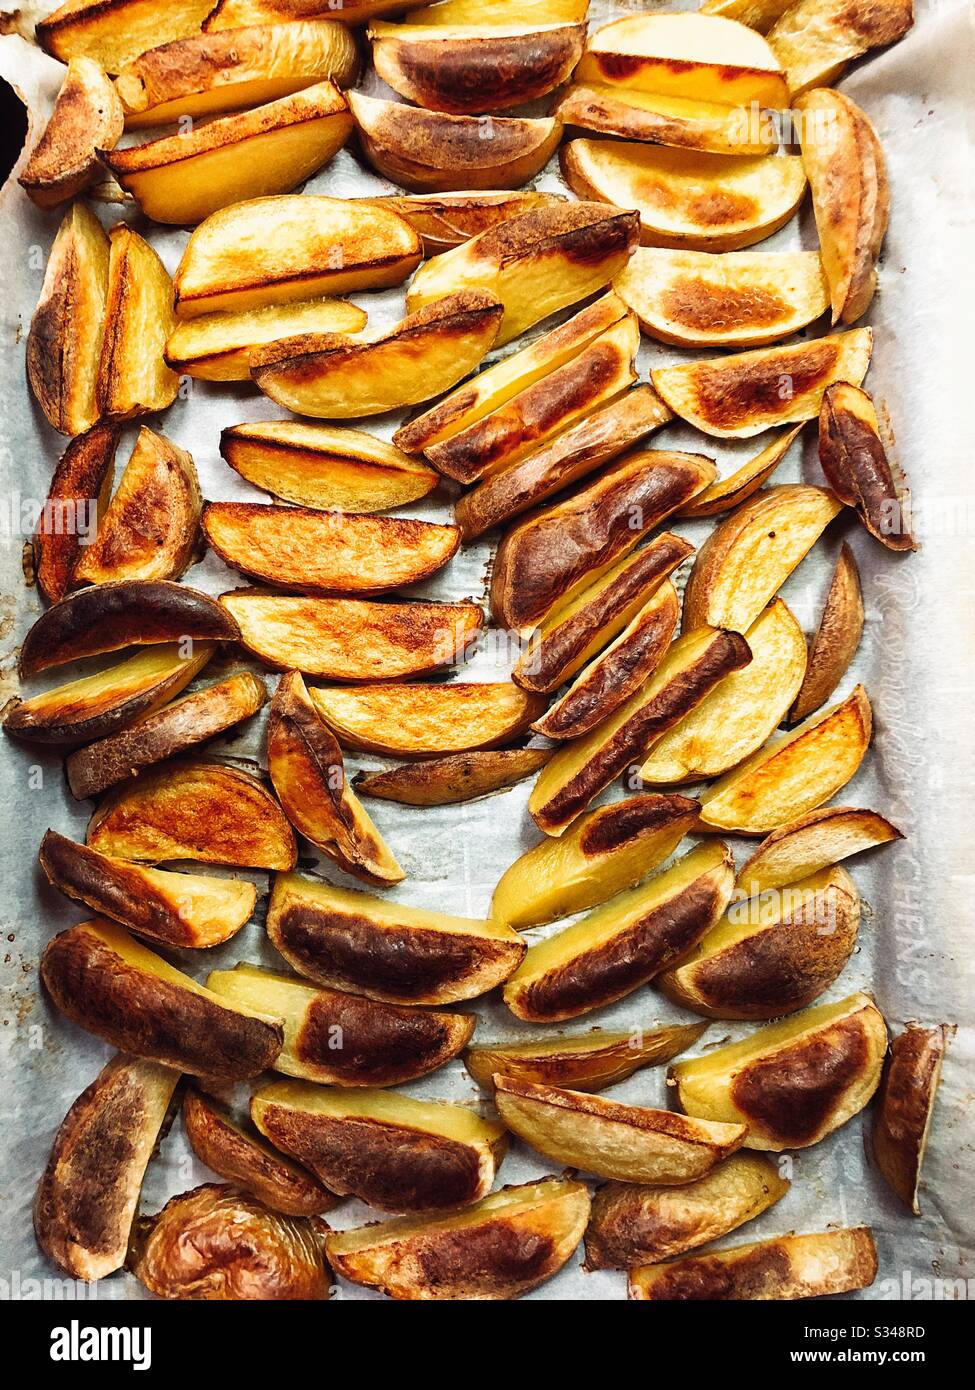 Roasted potato wedges straight from the oven Stock Photo